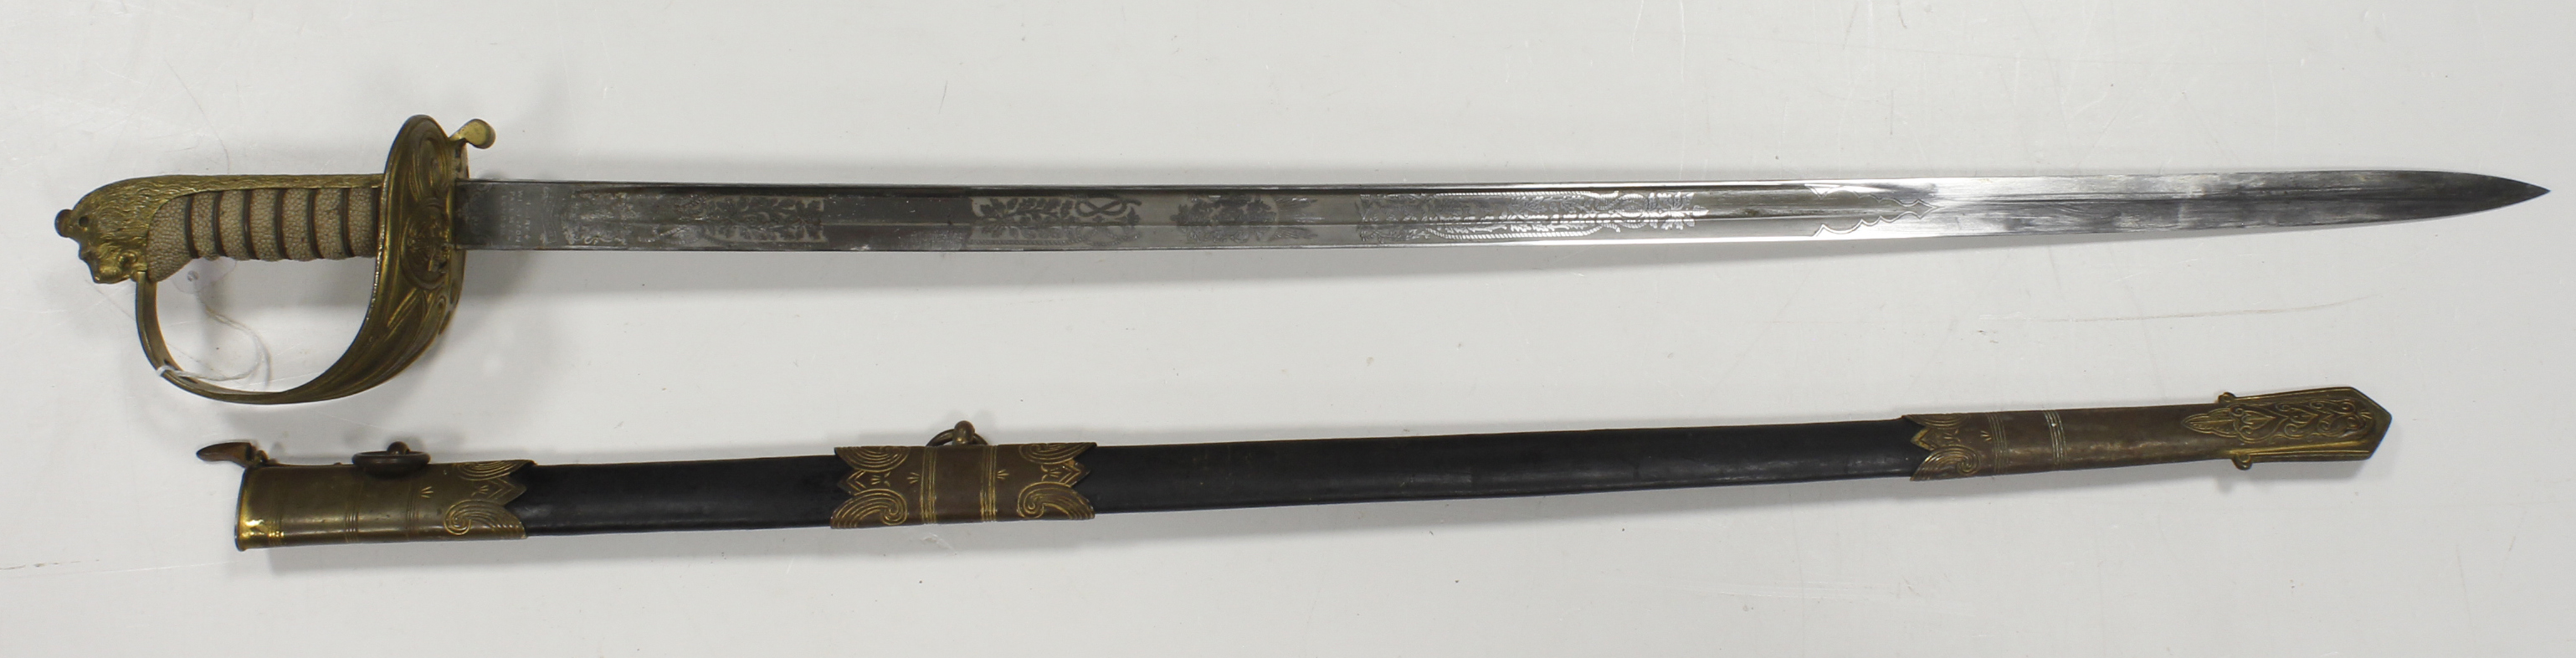 Fine 1827 Pattern Naval Officers Sword by Henry Wilkinson Pall Mall London. Blade 31" with Wilkinson